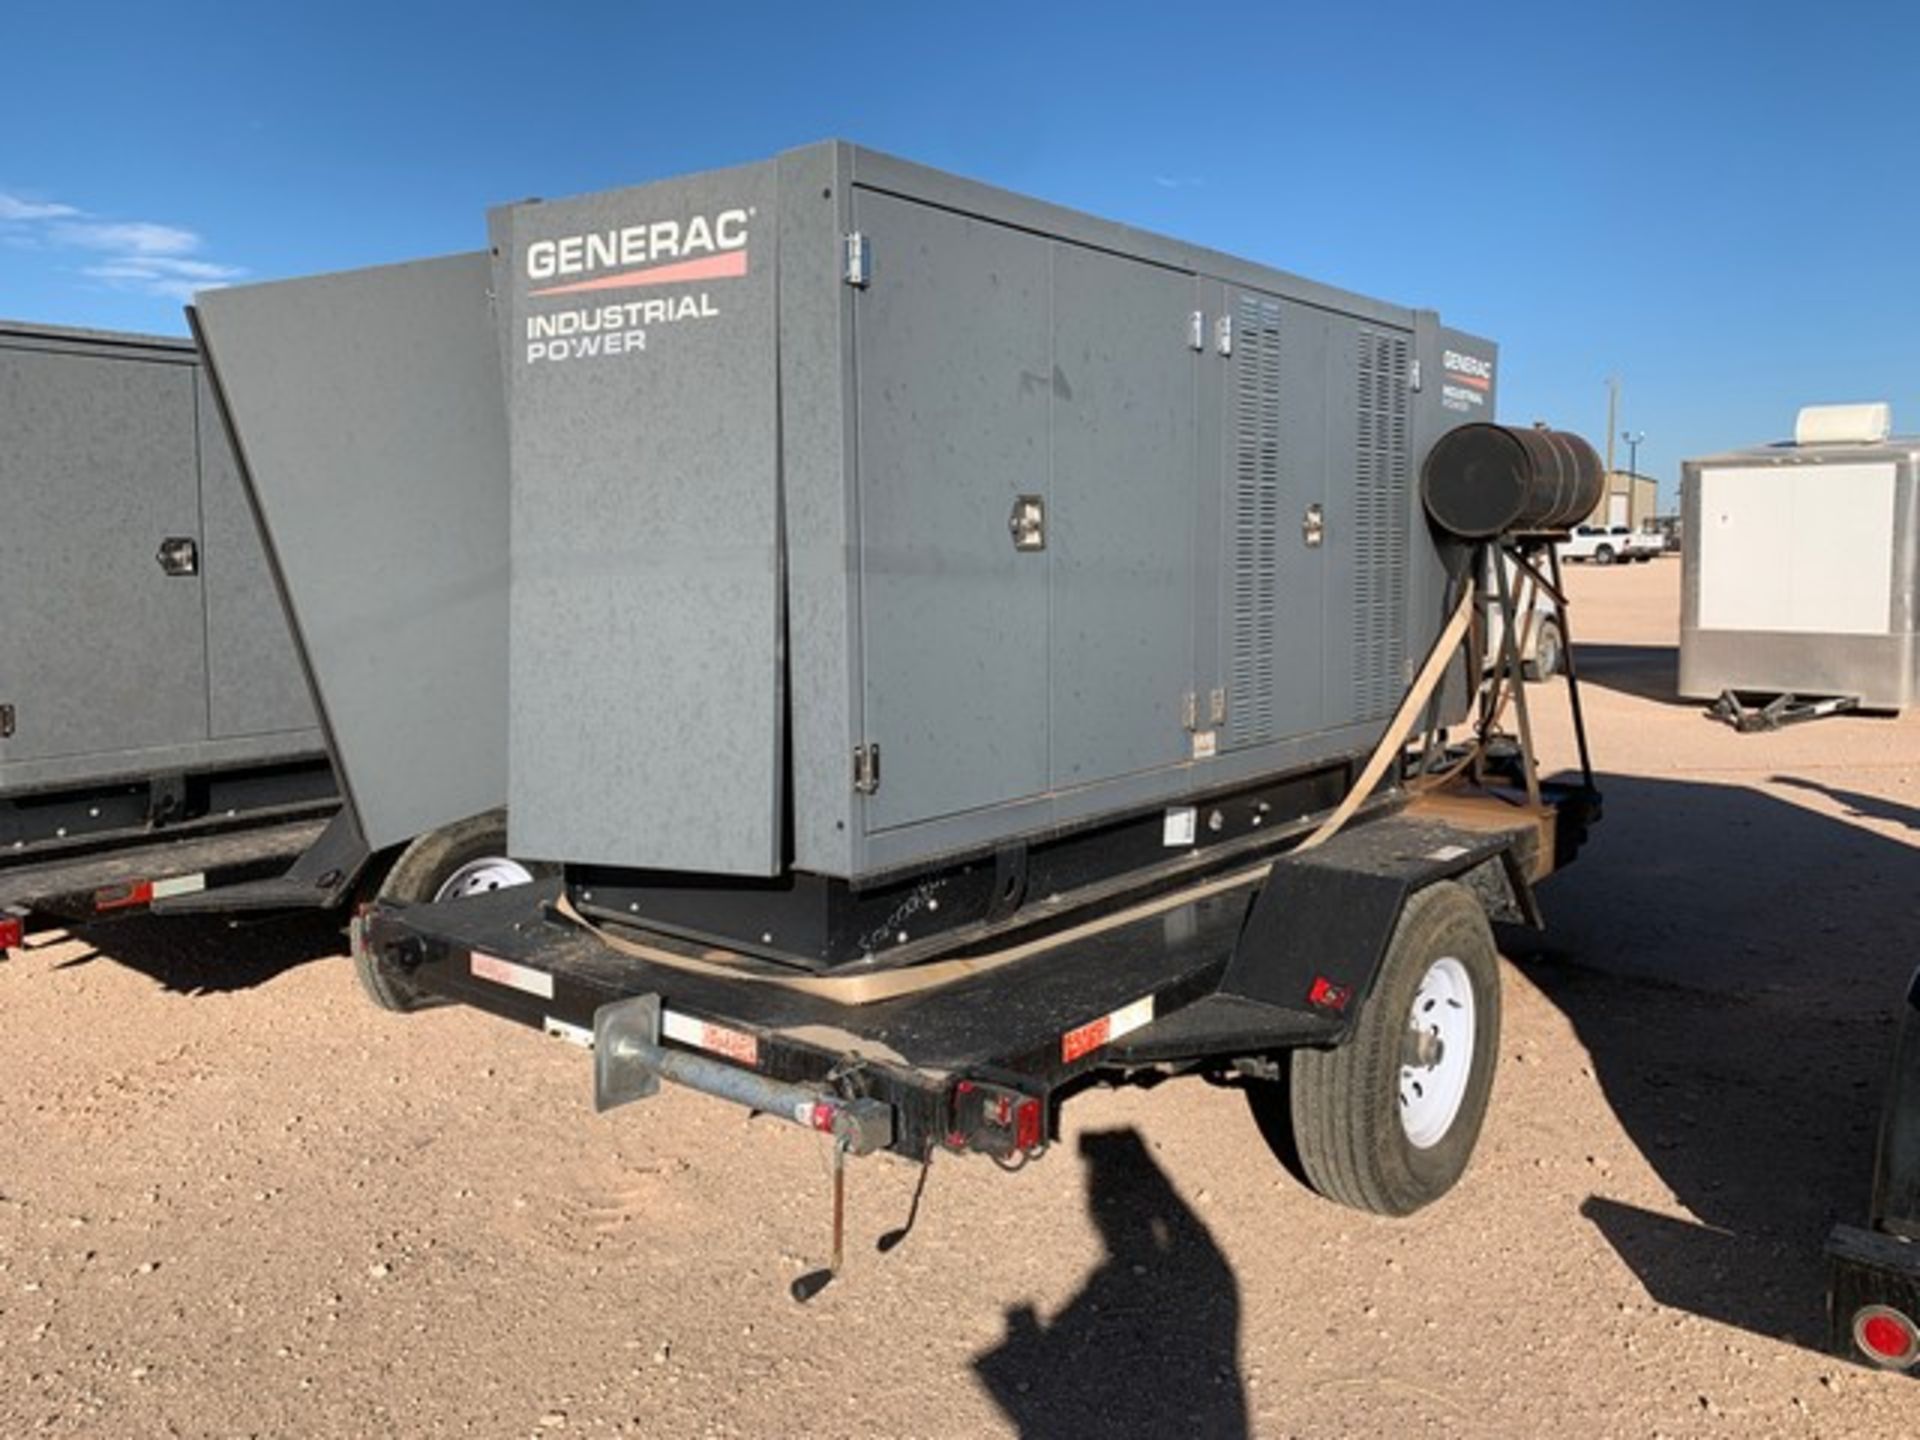 Located in YARD 1 - Midland, TX (2937) 2013 GENERAC INDUSTRIAL POWER 130 KW, 277/480V 3 PHASE - Image 3 of 4